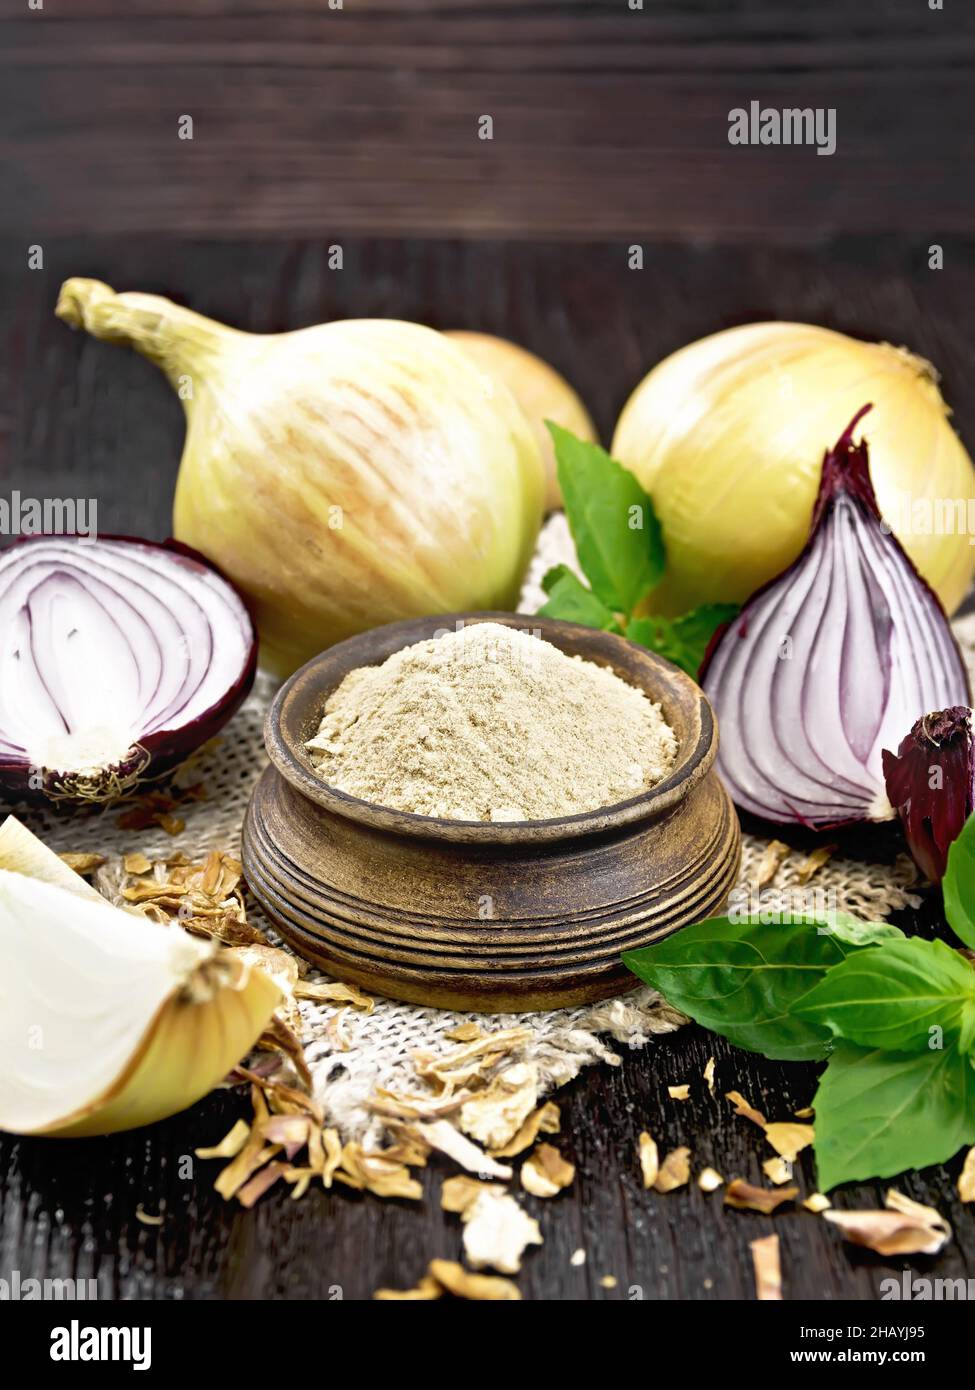 Onion powder in a bowl on a burlap napkin, purple and yellow onions, dried onion flakes and fresh basil on dark wooden board background Stock Photo